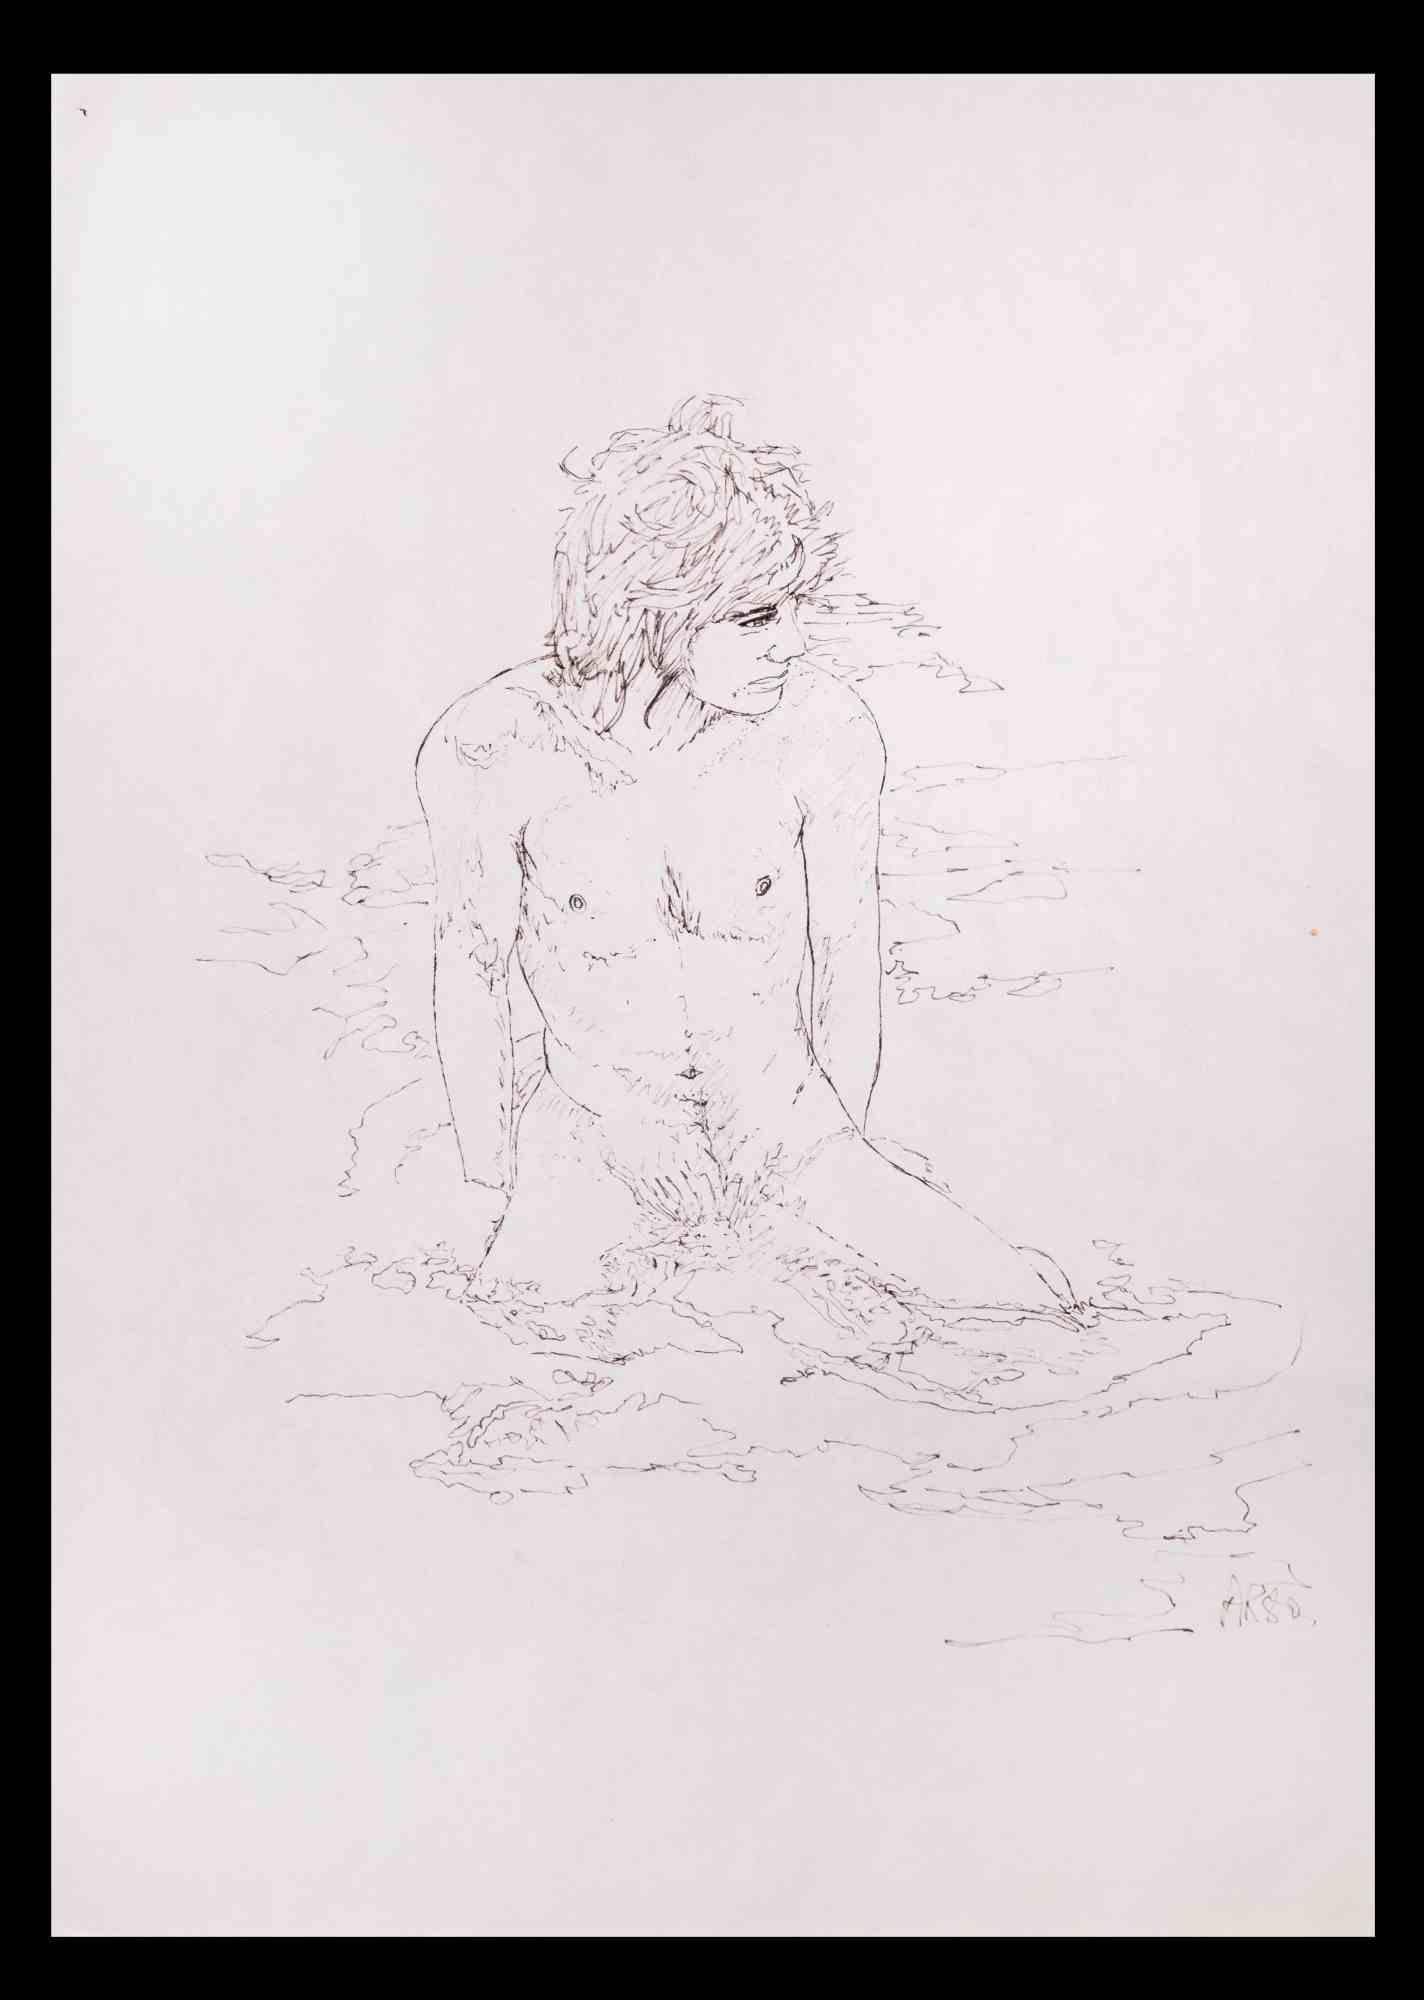 The boy at the sea is an original drawing on pencil  realized by Anthony Roaland in 1980. Hand-signed and dated by the artist on the lower right margin. 

The boy is depicted with a fresh and delicate style.

Good conditions.